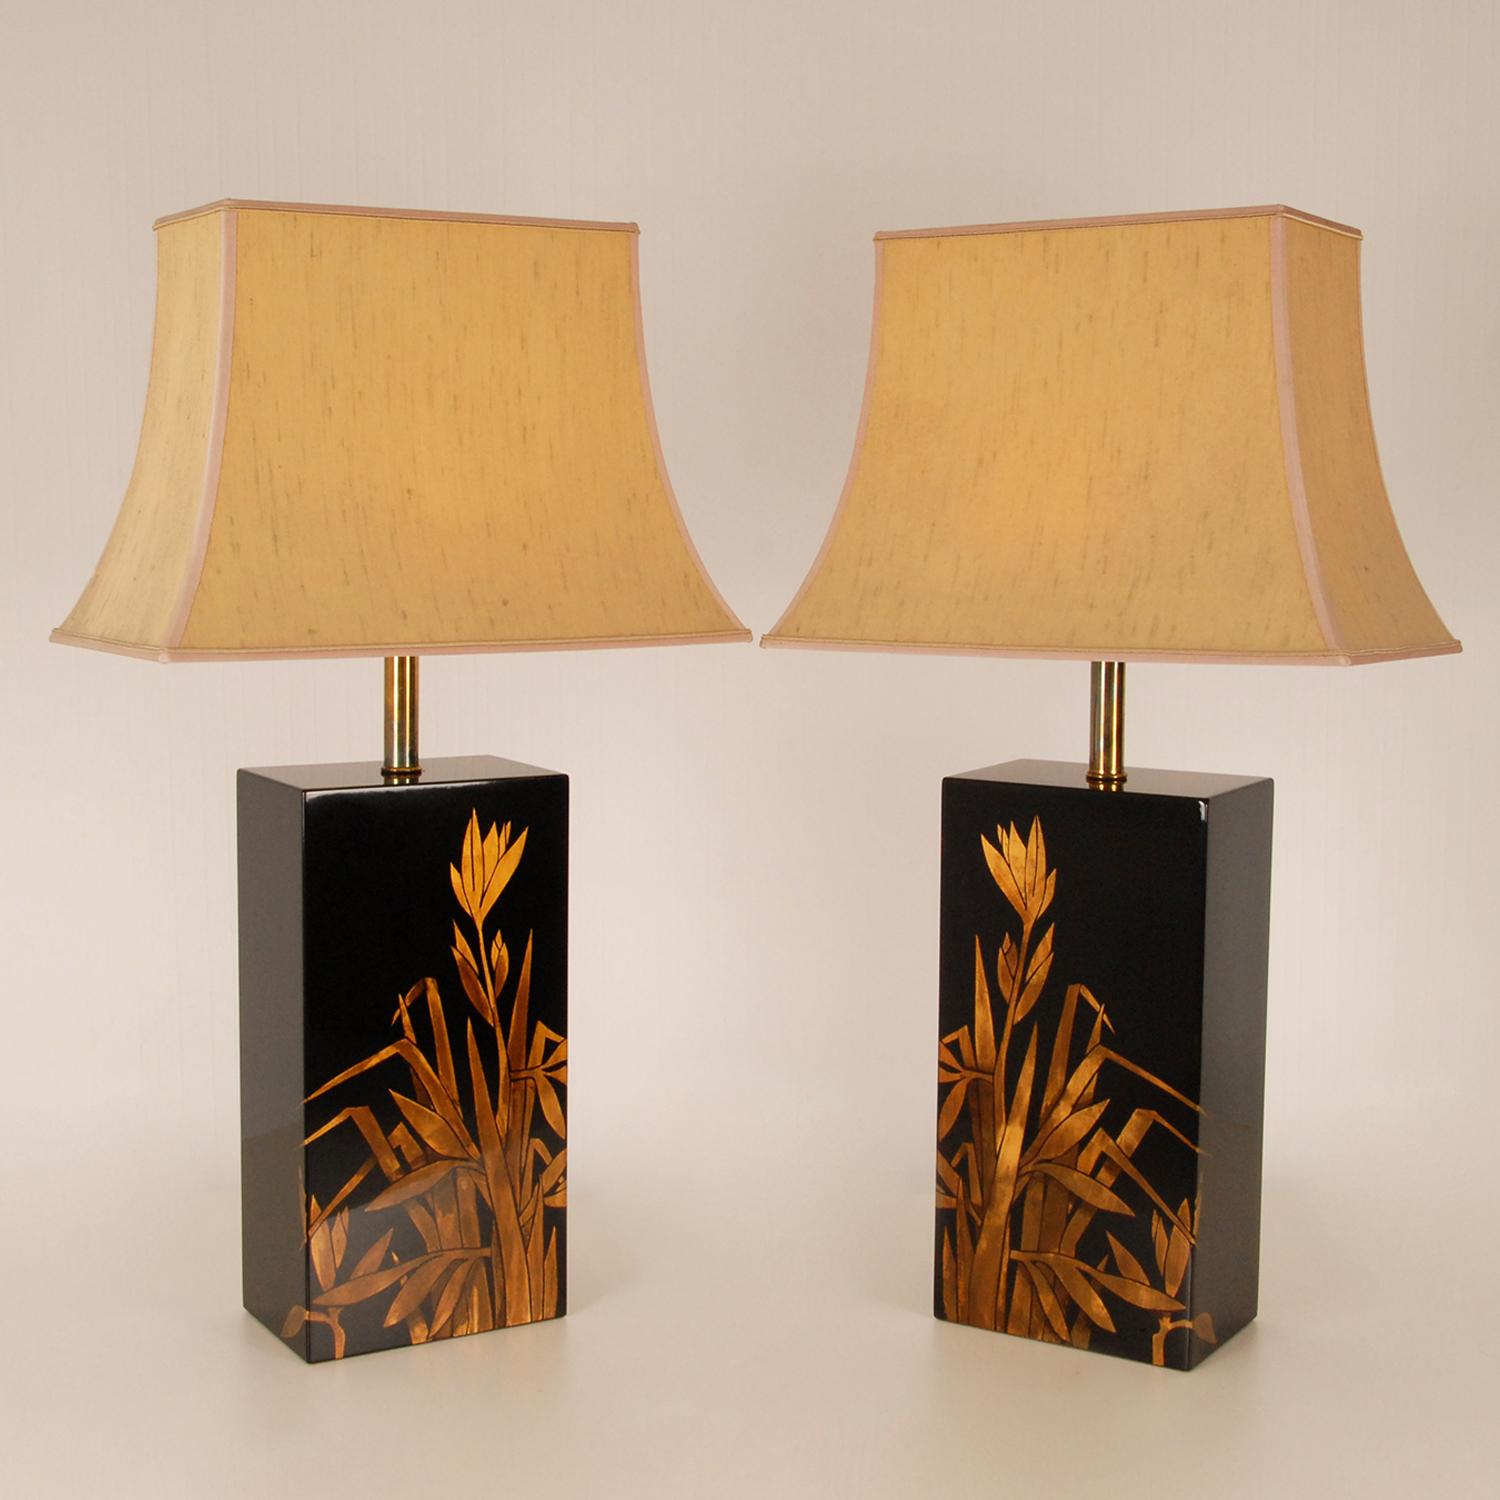 Vintage Chinoiserie Gold and Black lacquer Pagoda Table Lamps Retro 1970s a Pair For Sale 2